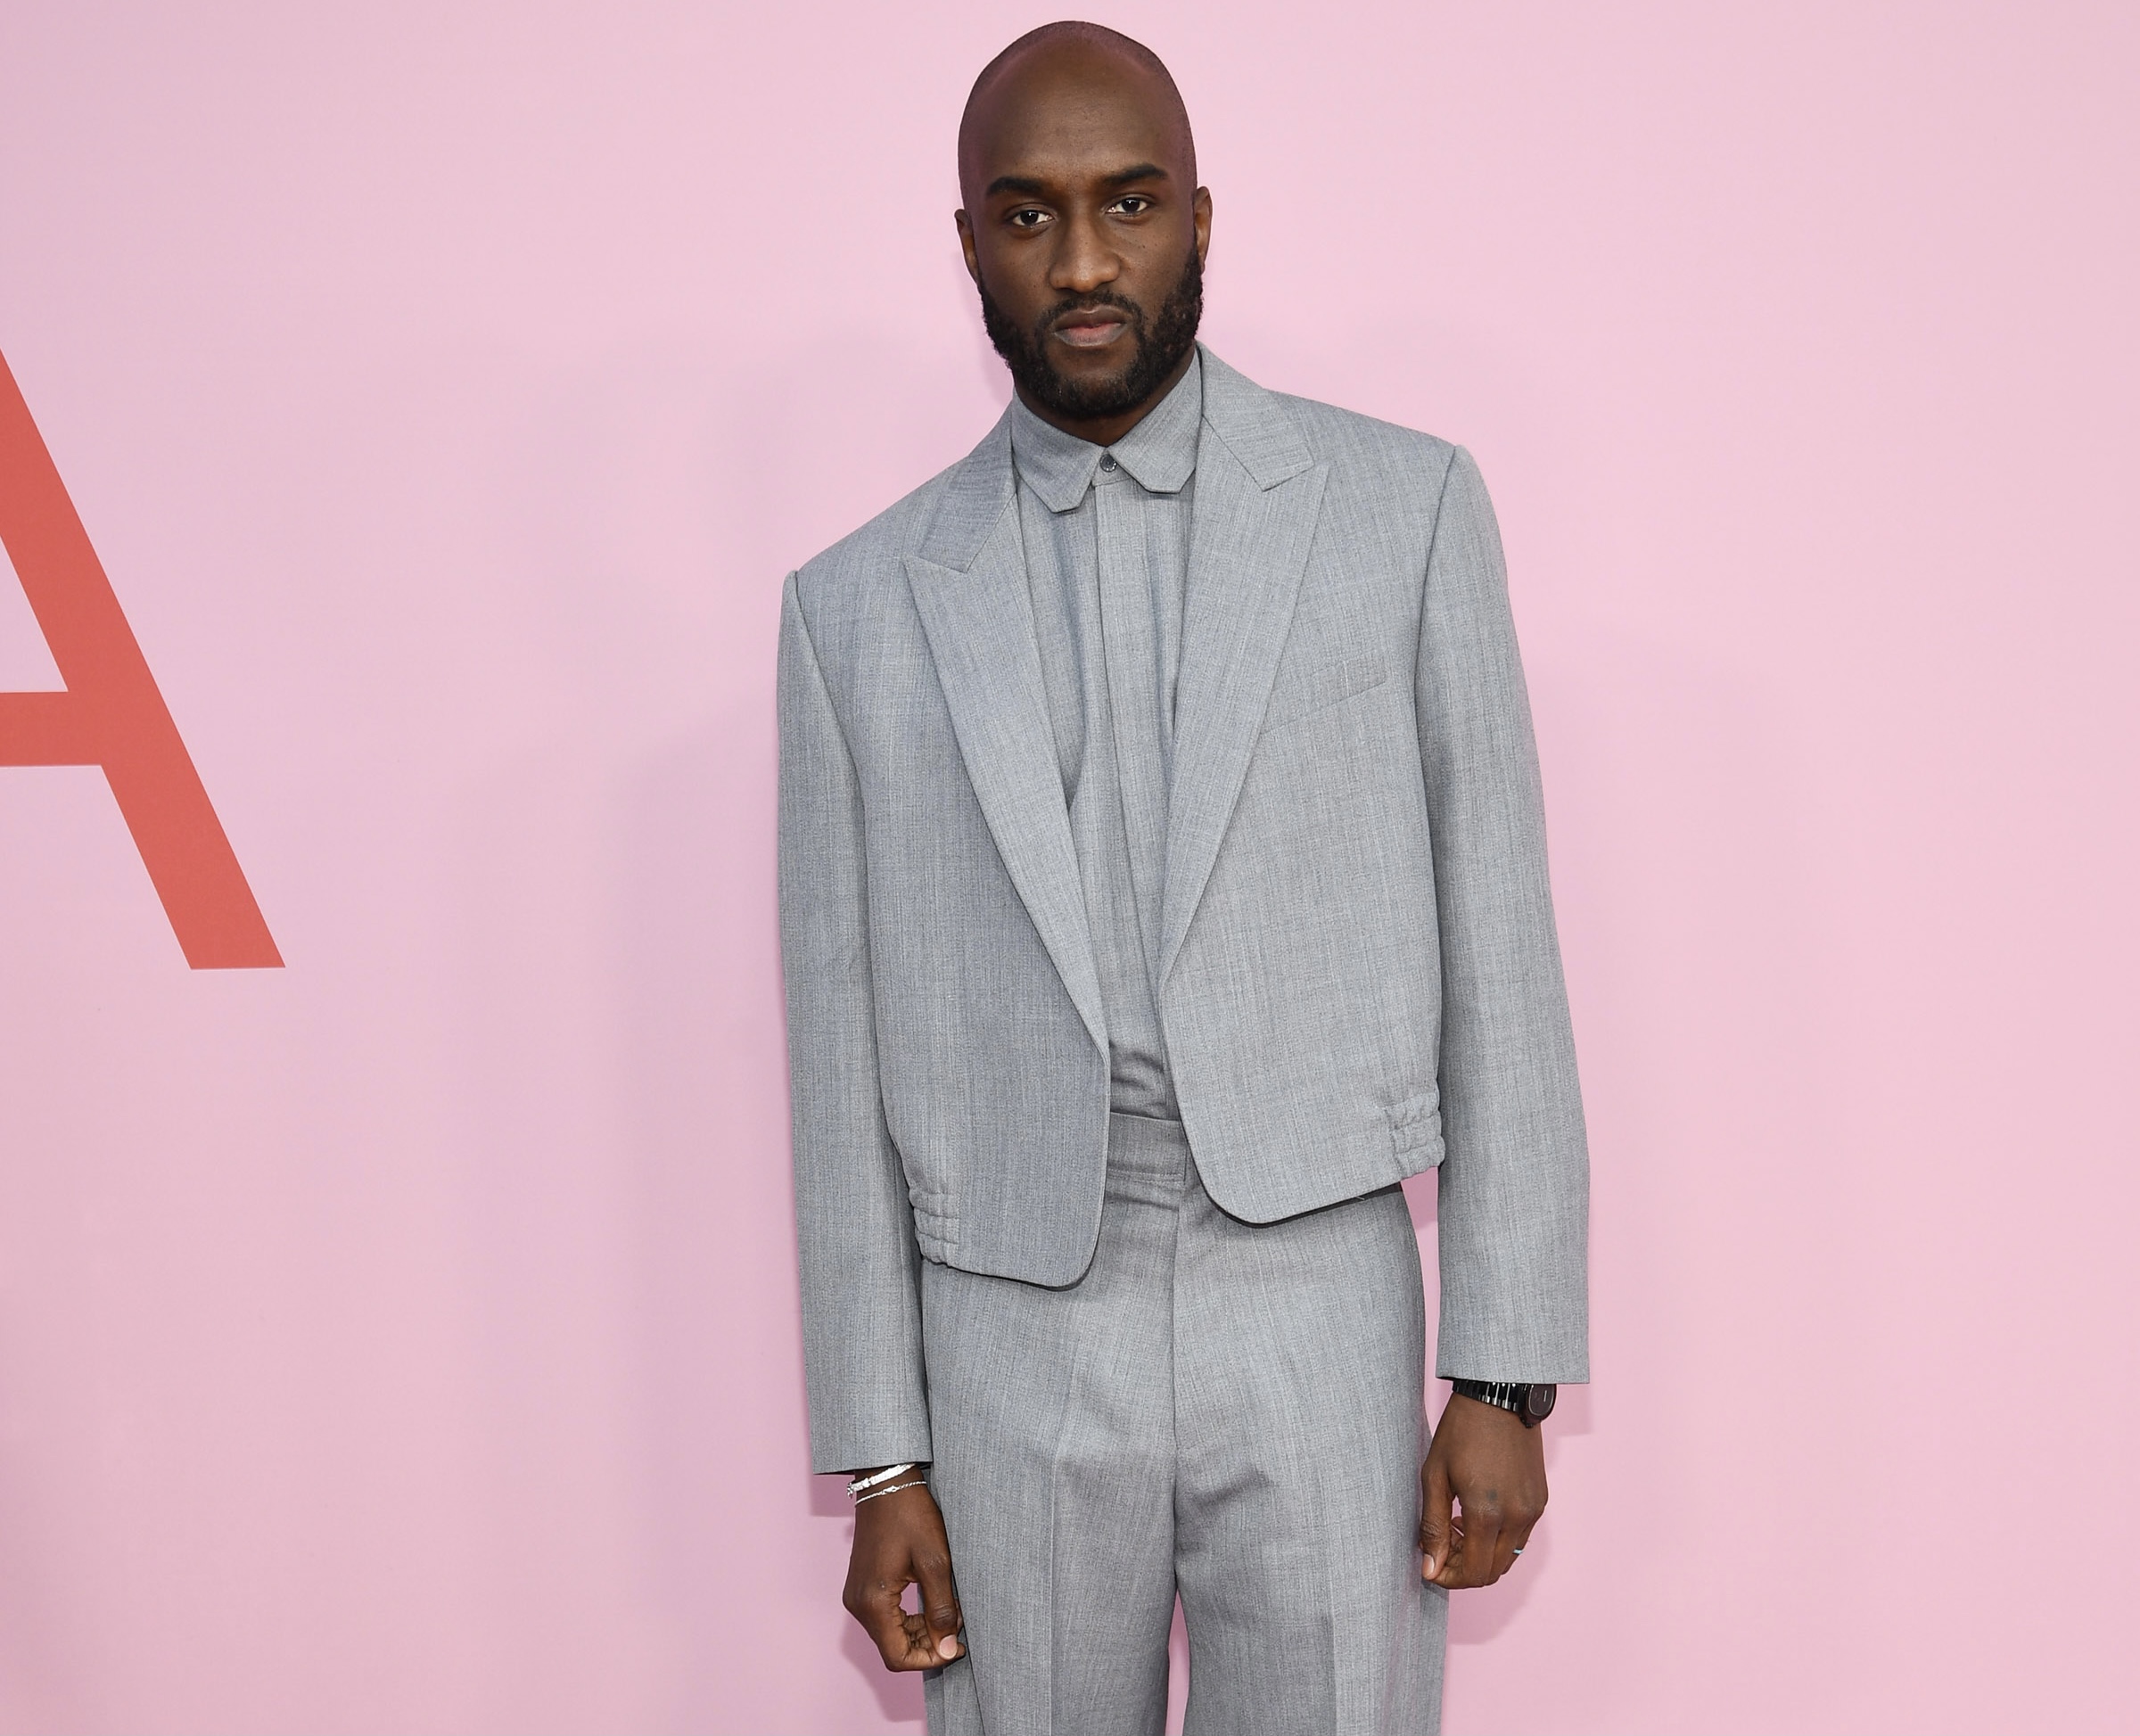 Virgil Abloh passed away of cancer 💔 : r/Sneakers